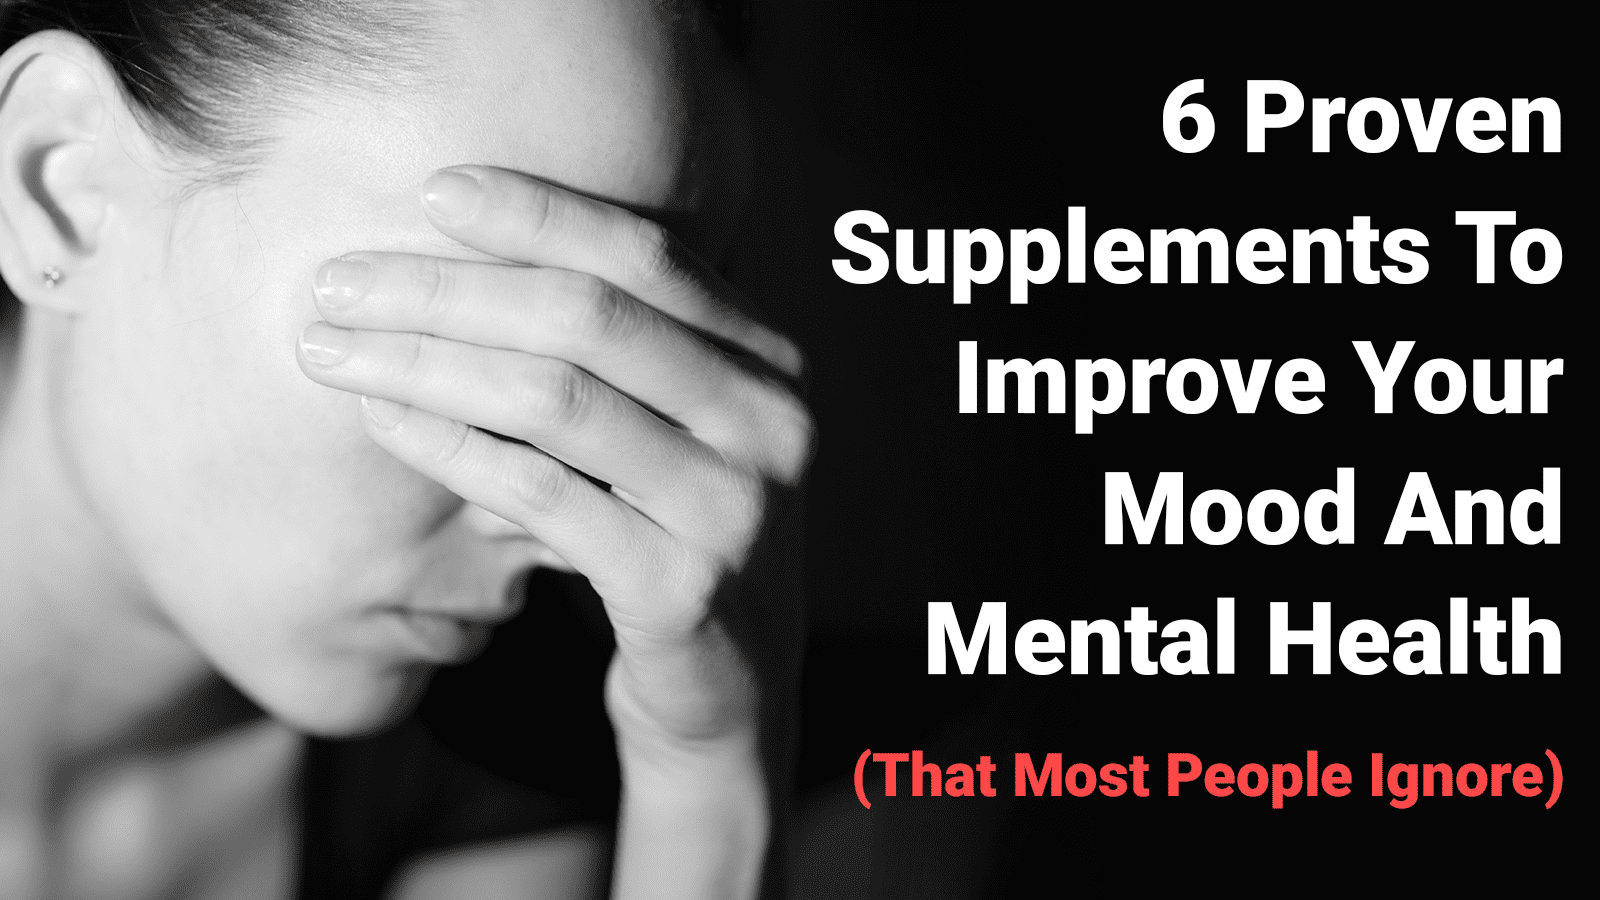 6 Proven Supplements To Improve Your Mood And Mental Health (That Most People Ignore)